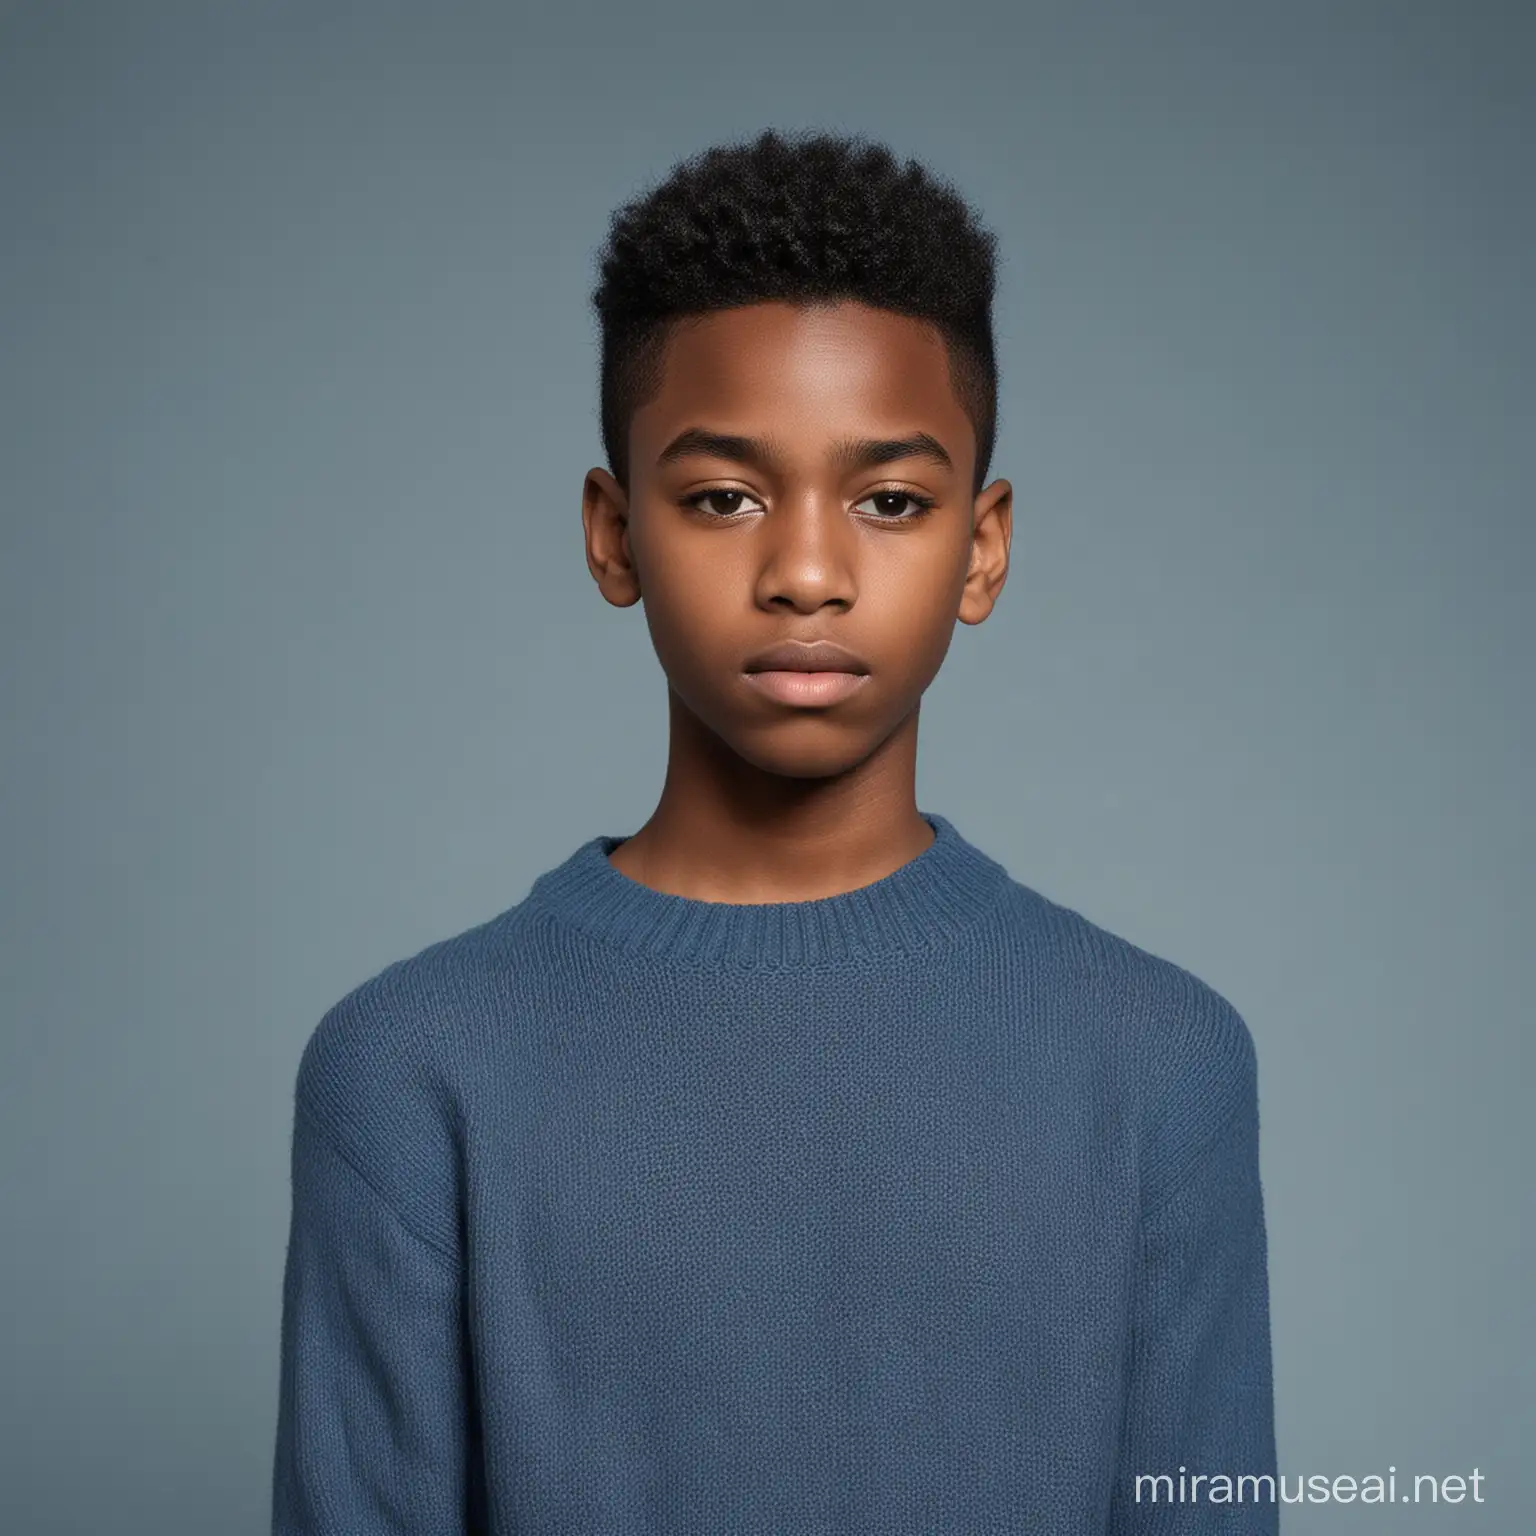 a sad and tired african dark skin teenage boy with black african hair haircut and cut sides standing up facing the left wearing a blue sweater
